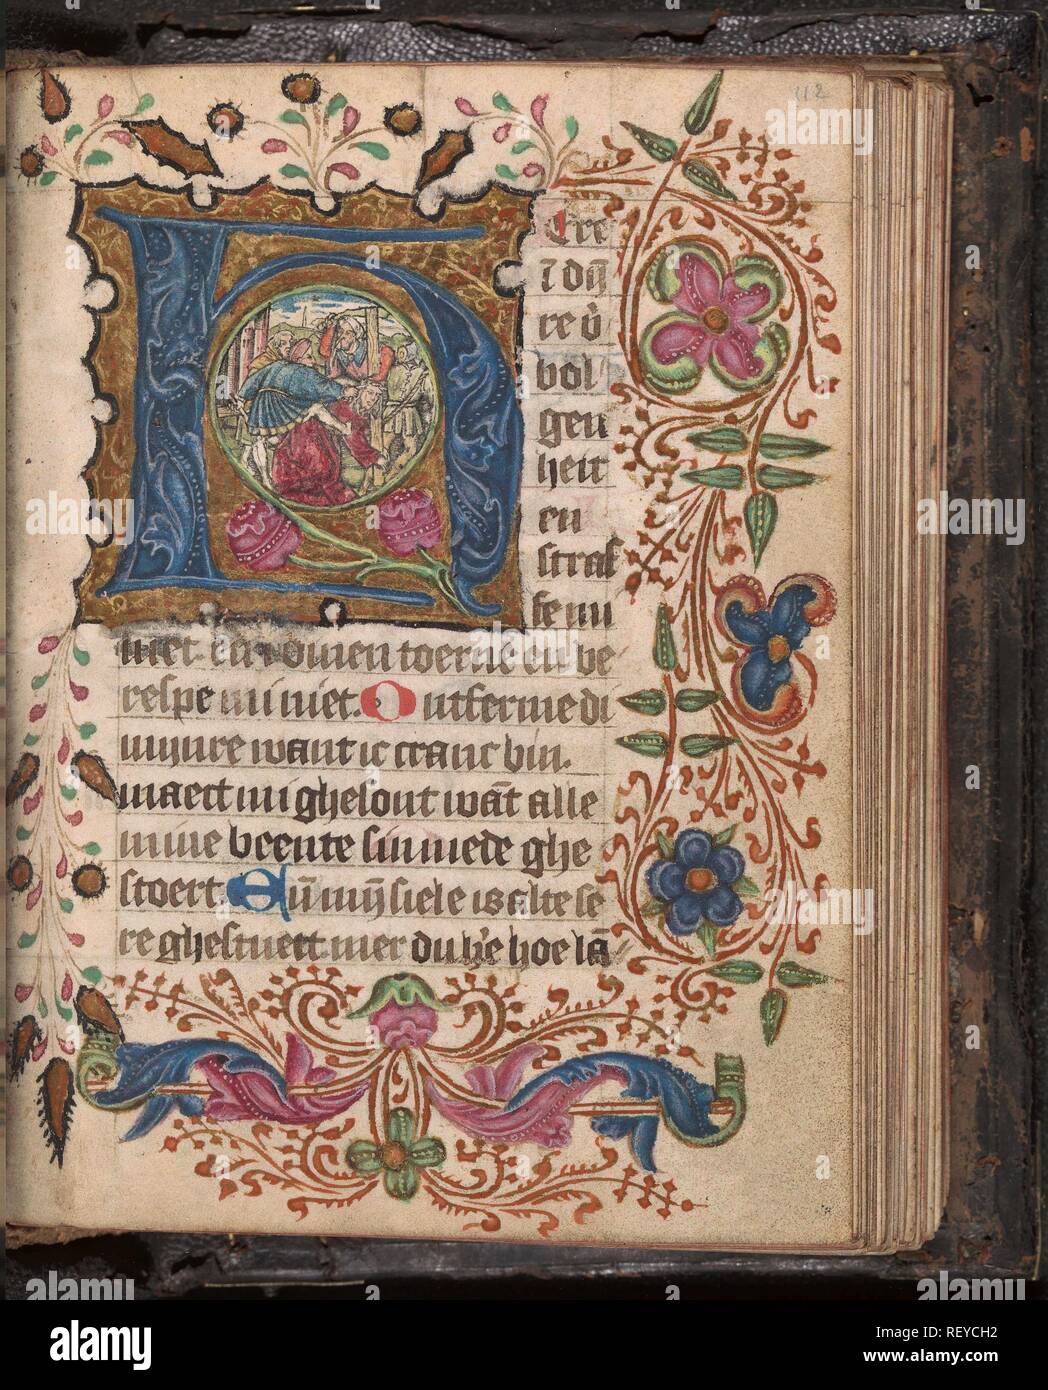 Book of hours with seven historiated initials with engravings in the eye of the initials, with decorated initials and penwork. Draughtsman: anonymous. Print maker: Monogrammist S. Dating: 1475 - 1500. Place: Netherlands. Measurements: h 148 mm × w 110 mm × t 50 mm. Museum: Rijksmuseum, Amsterdam. Stock Photo